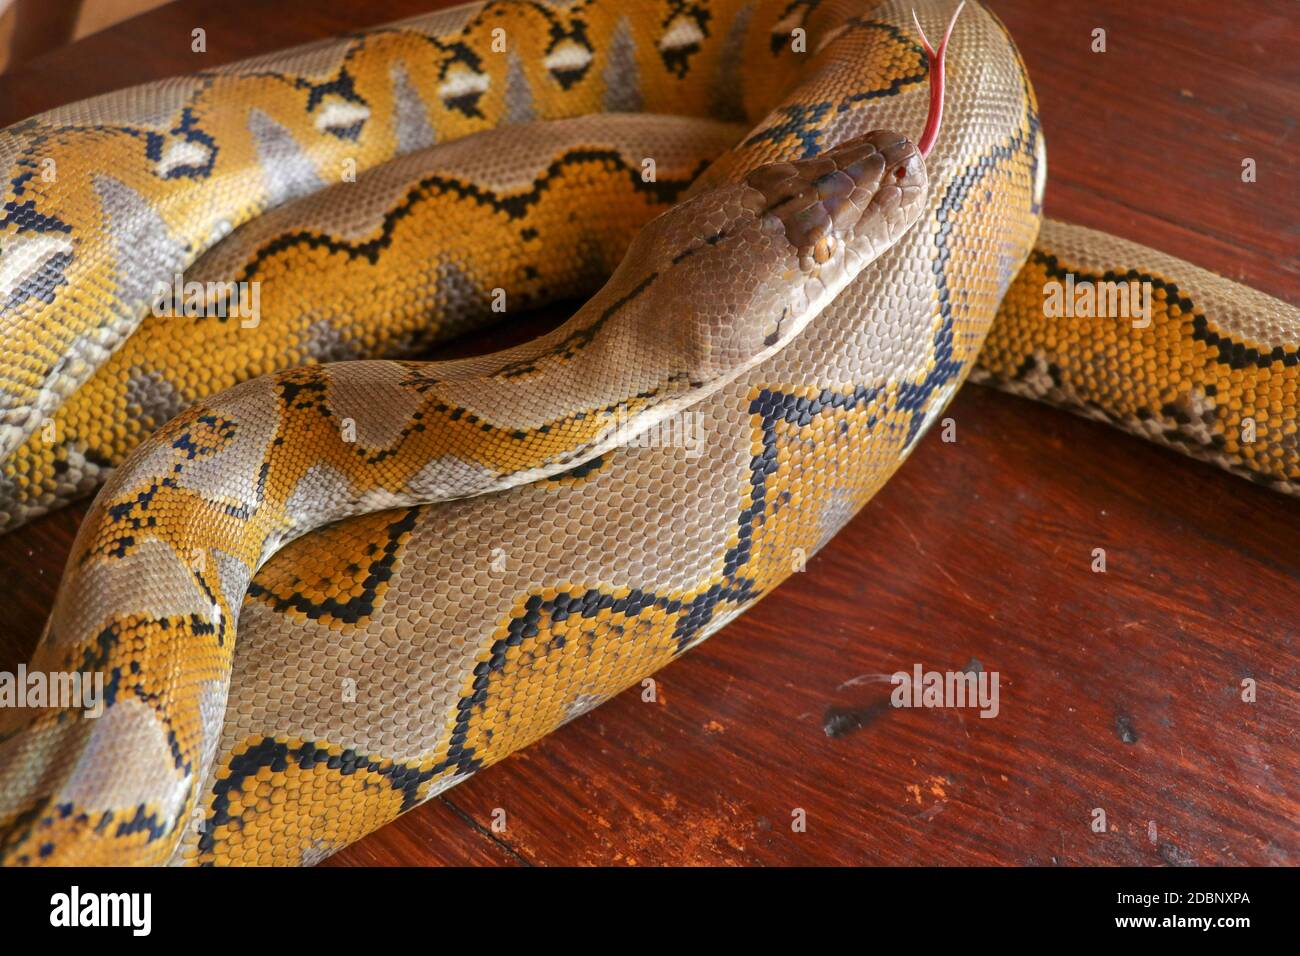 https://c8.alamy.com/comp/2DBNXPA/gold-yellow-python-albino-snake-with-beautiful-yellow-texture-pattern-boa-snake-skin-abstract-texture-close-up-of-snake-skin-texture-use-for-backgr-2DBNXPA.jpg